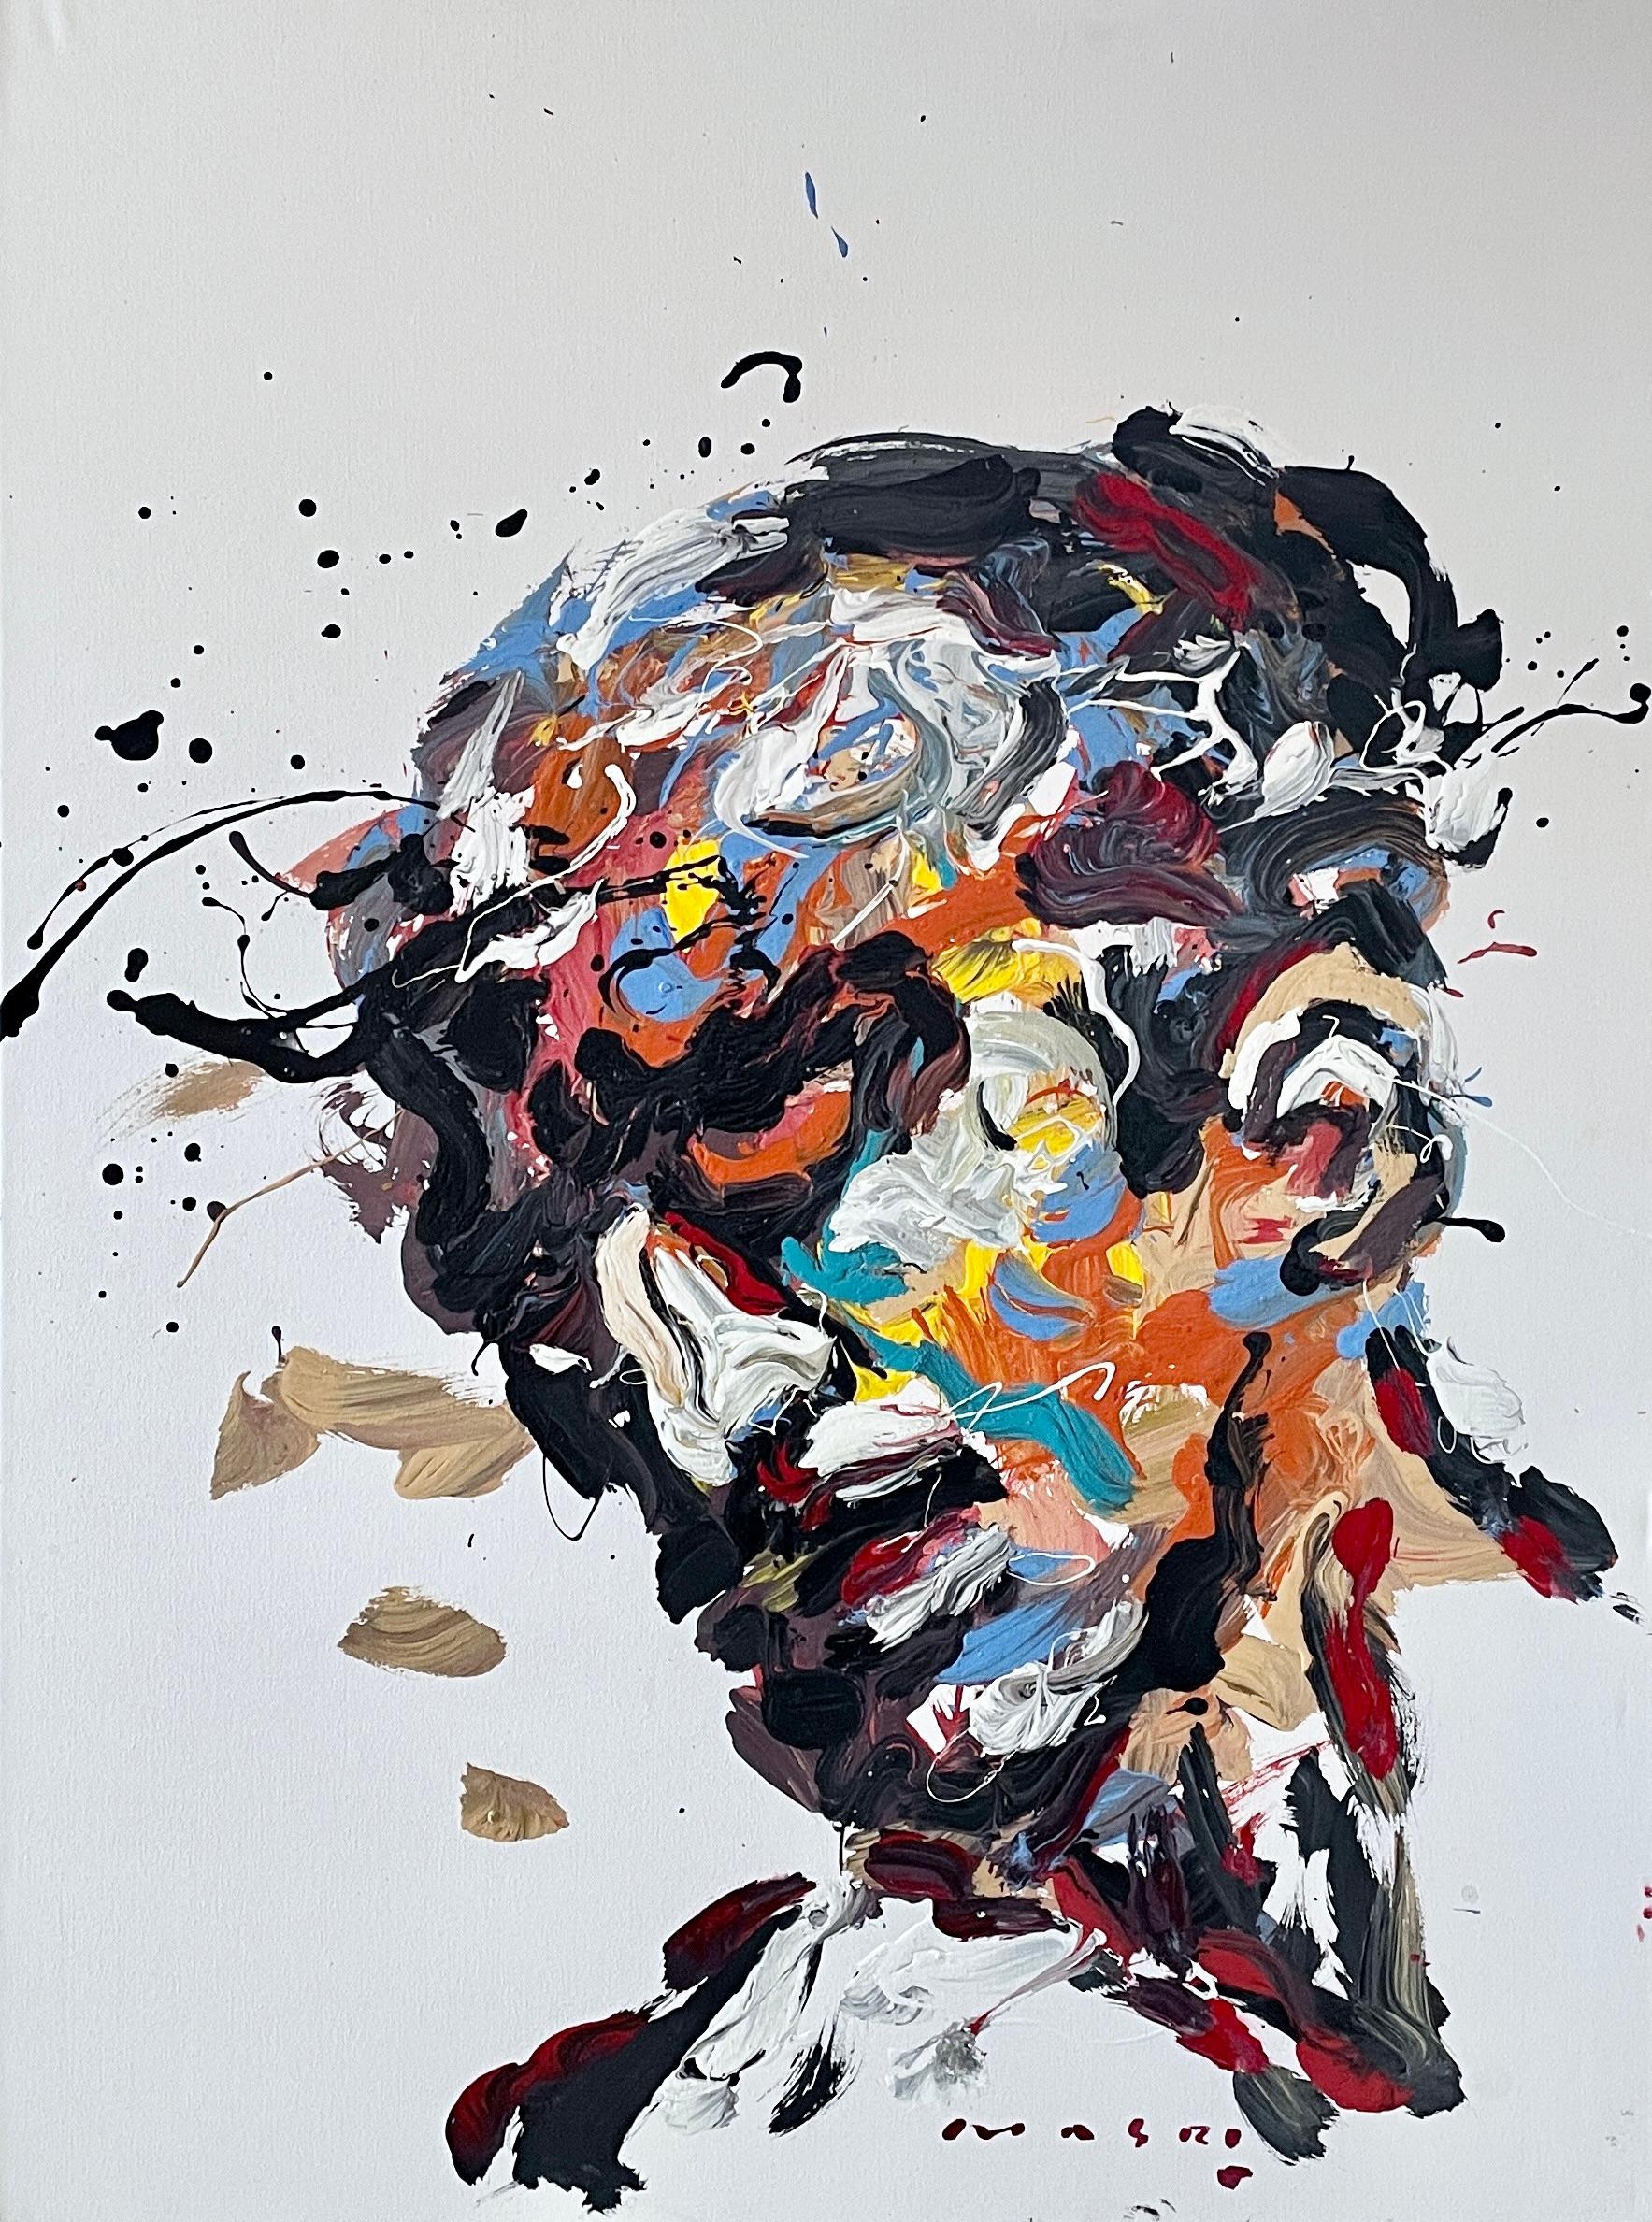 Masri Hayssam Portrait Painting - 'Ponder' by Masri - Colorful Portrait of a Man - Mixed Media Painting on Canvas